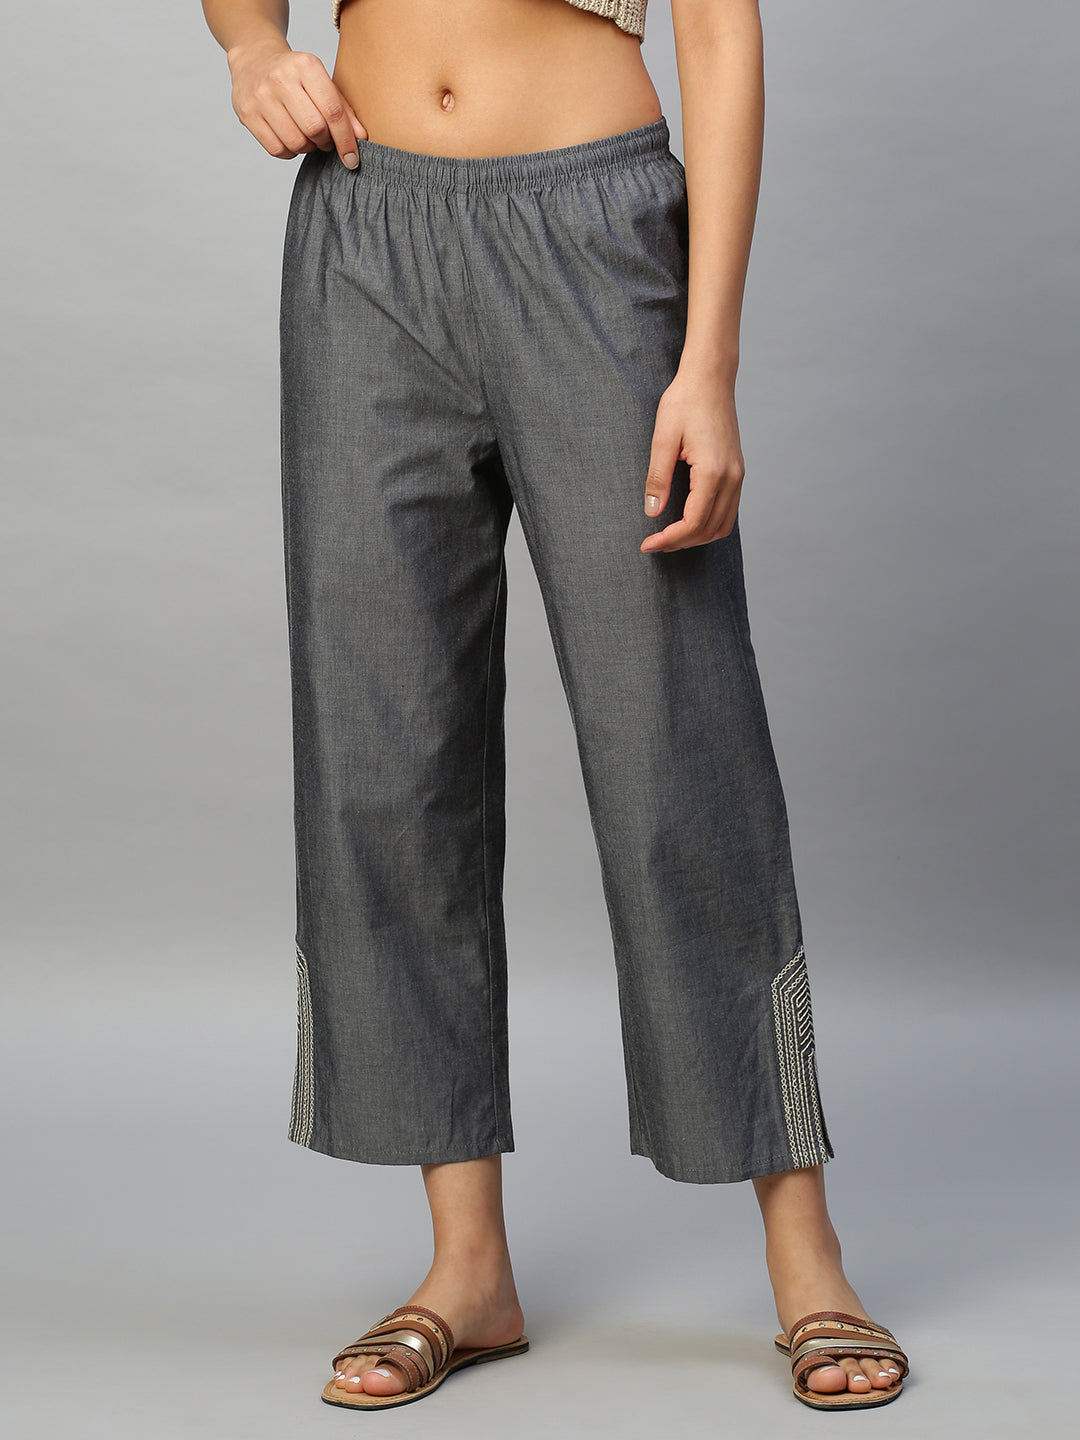 Embroidered Charcoal Chambray Pull On Trousers